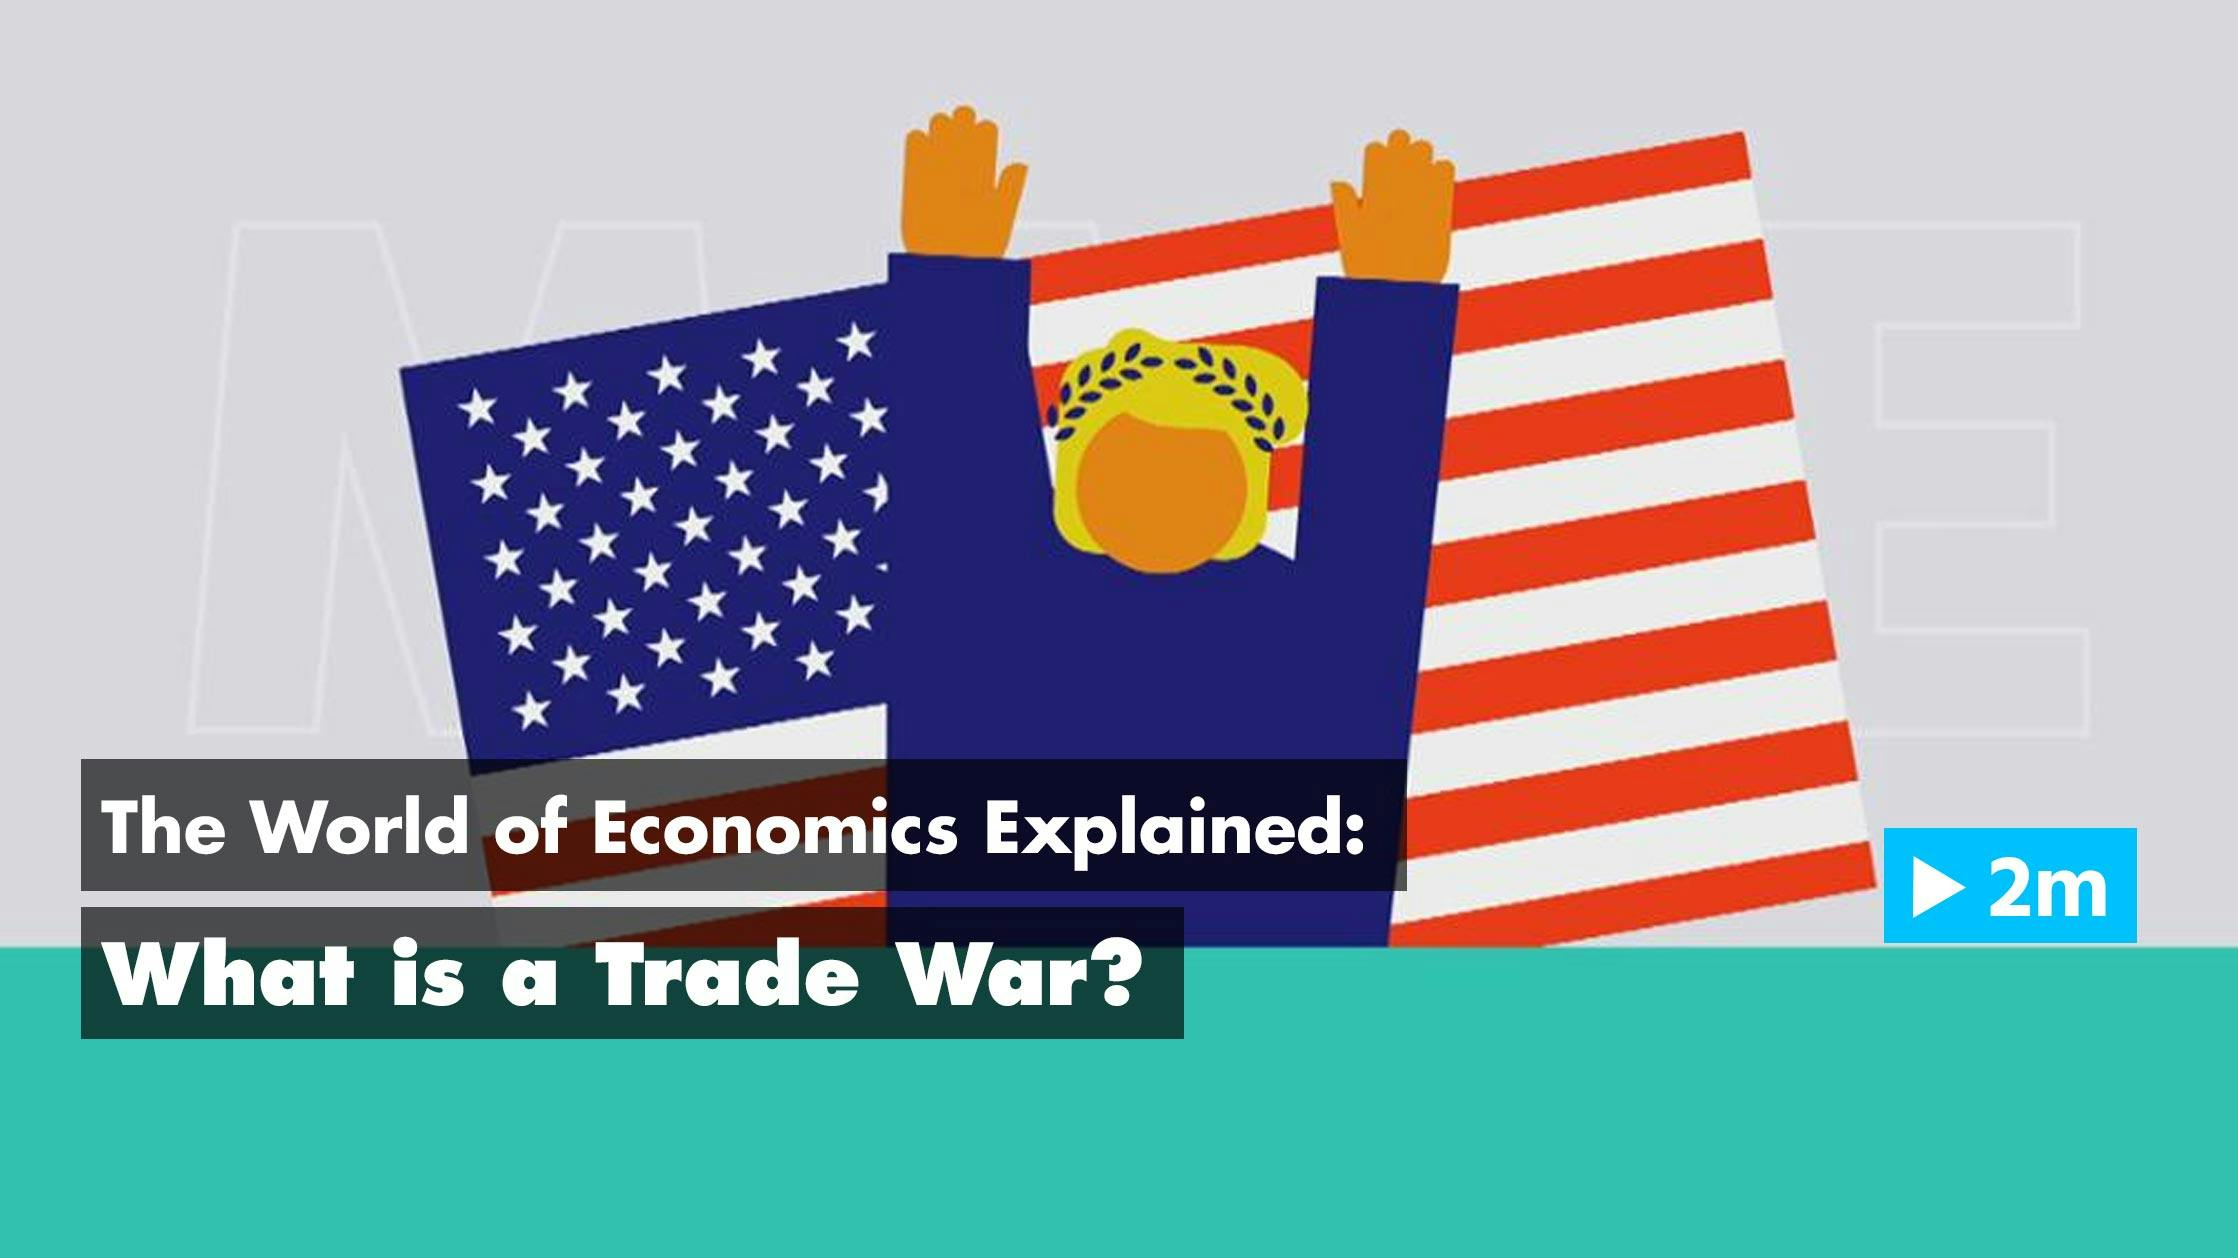 The World of Economics Explained: What is a trade war?